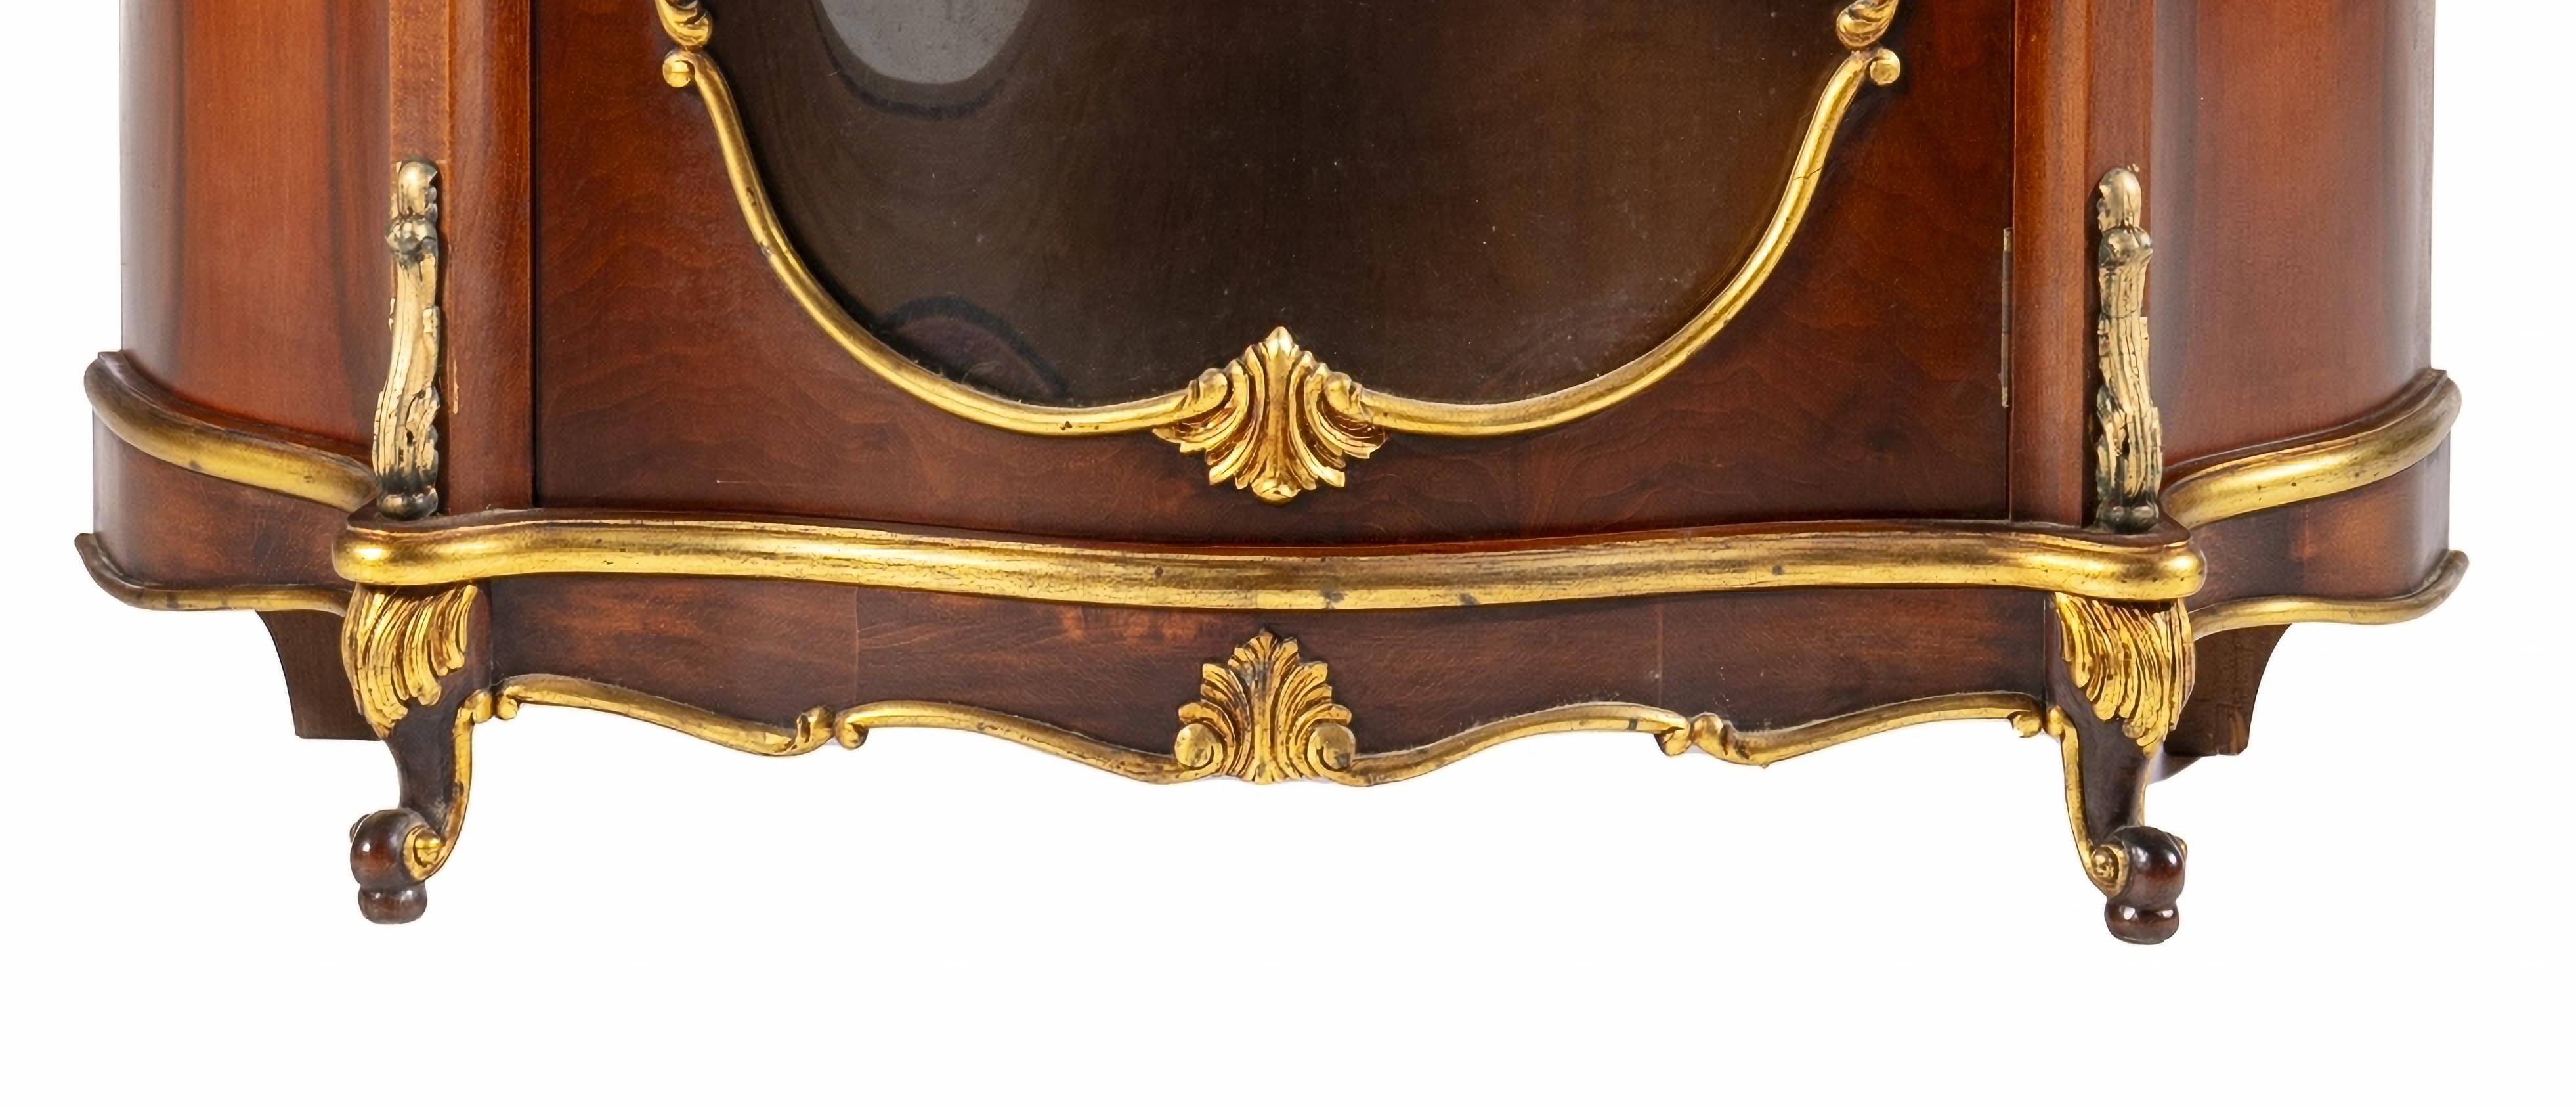 LOUIS XVI STYLE CABINET French early 20th Century

in mahogany wood with gilding with a 